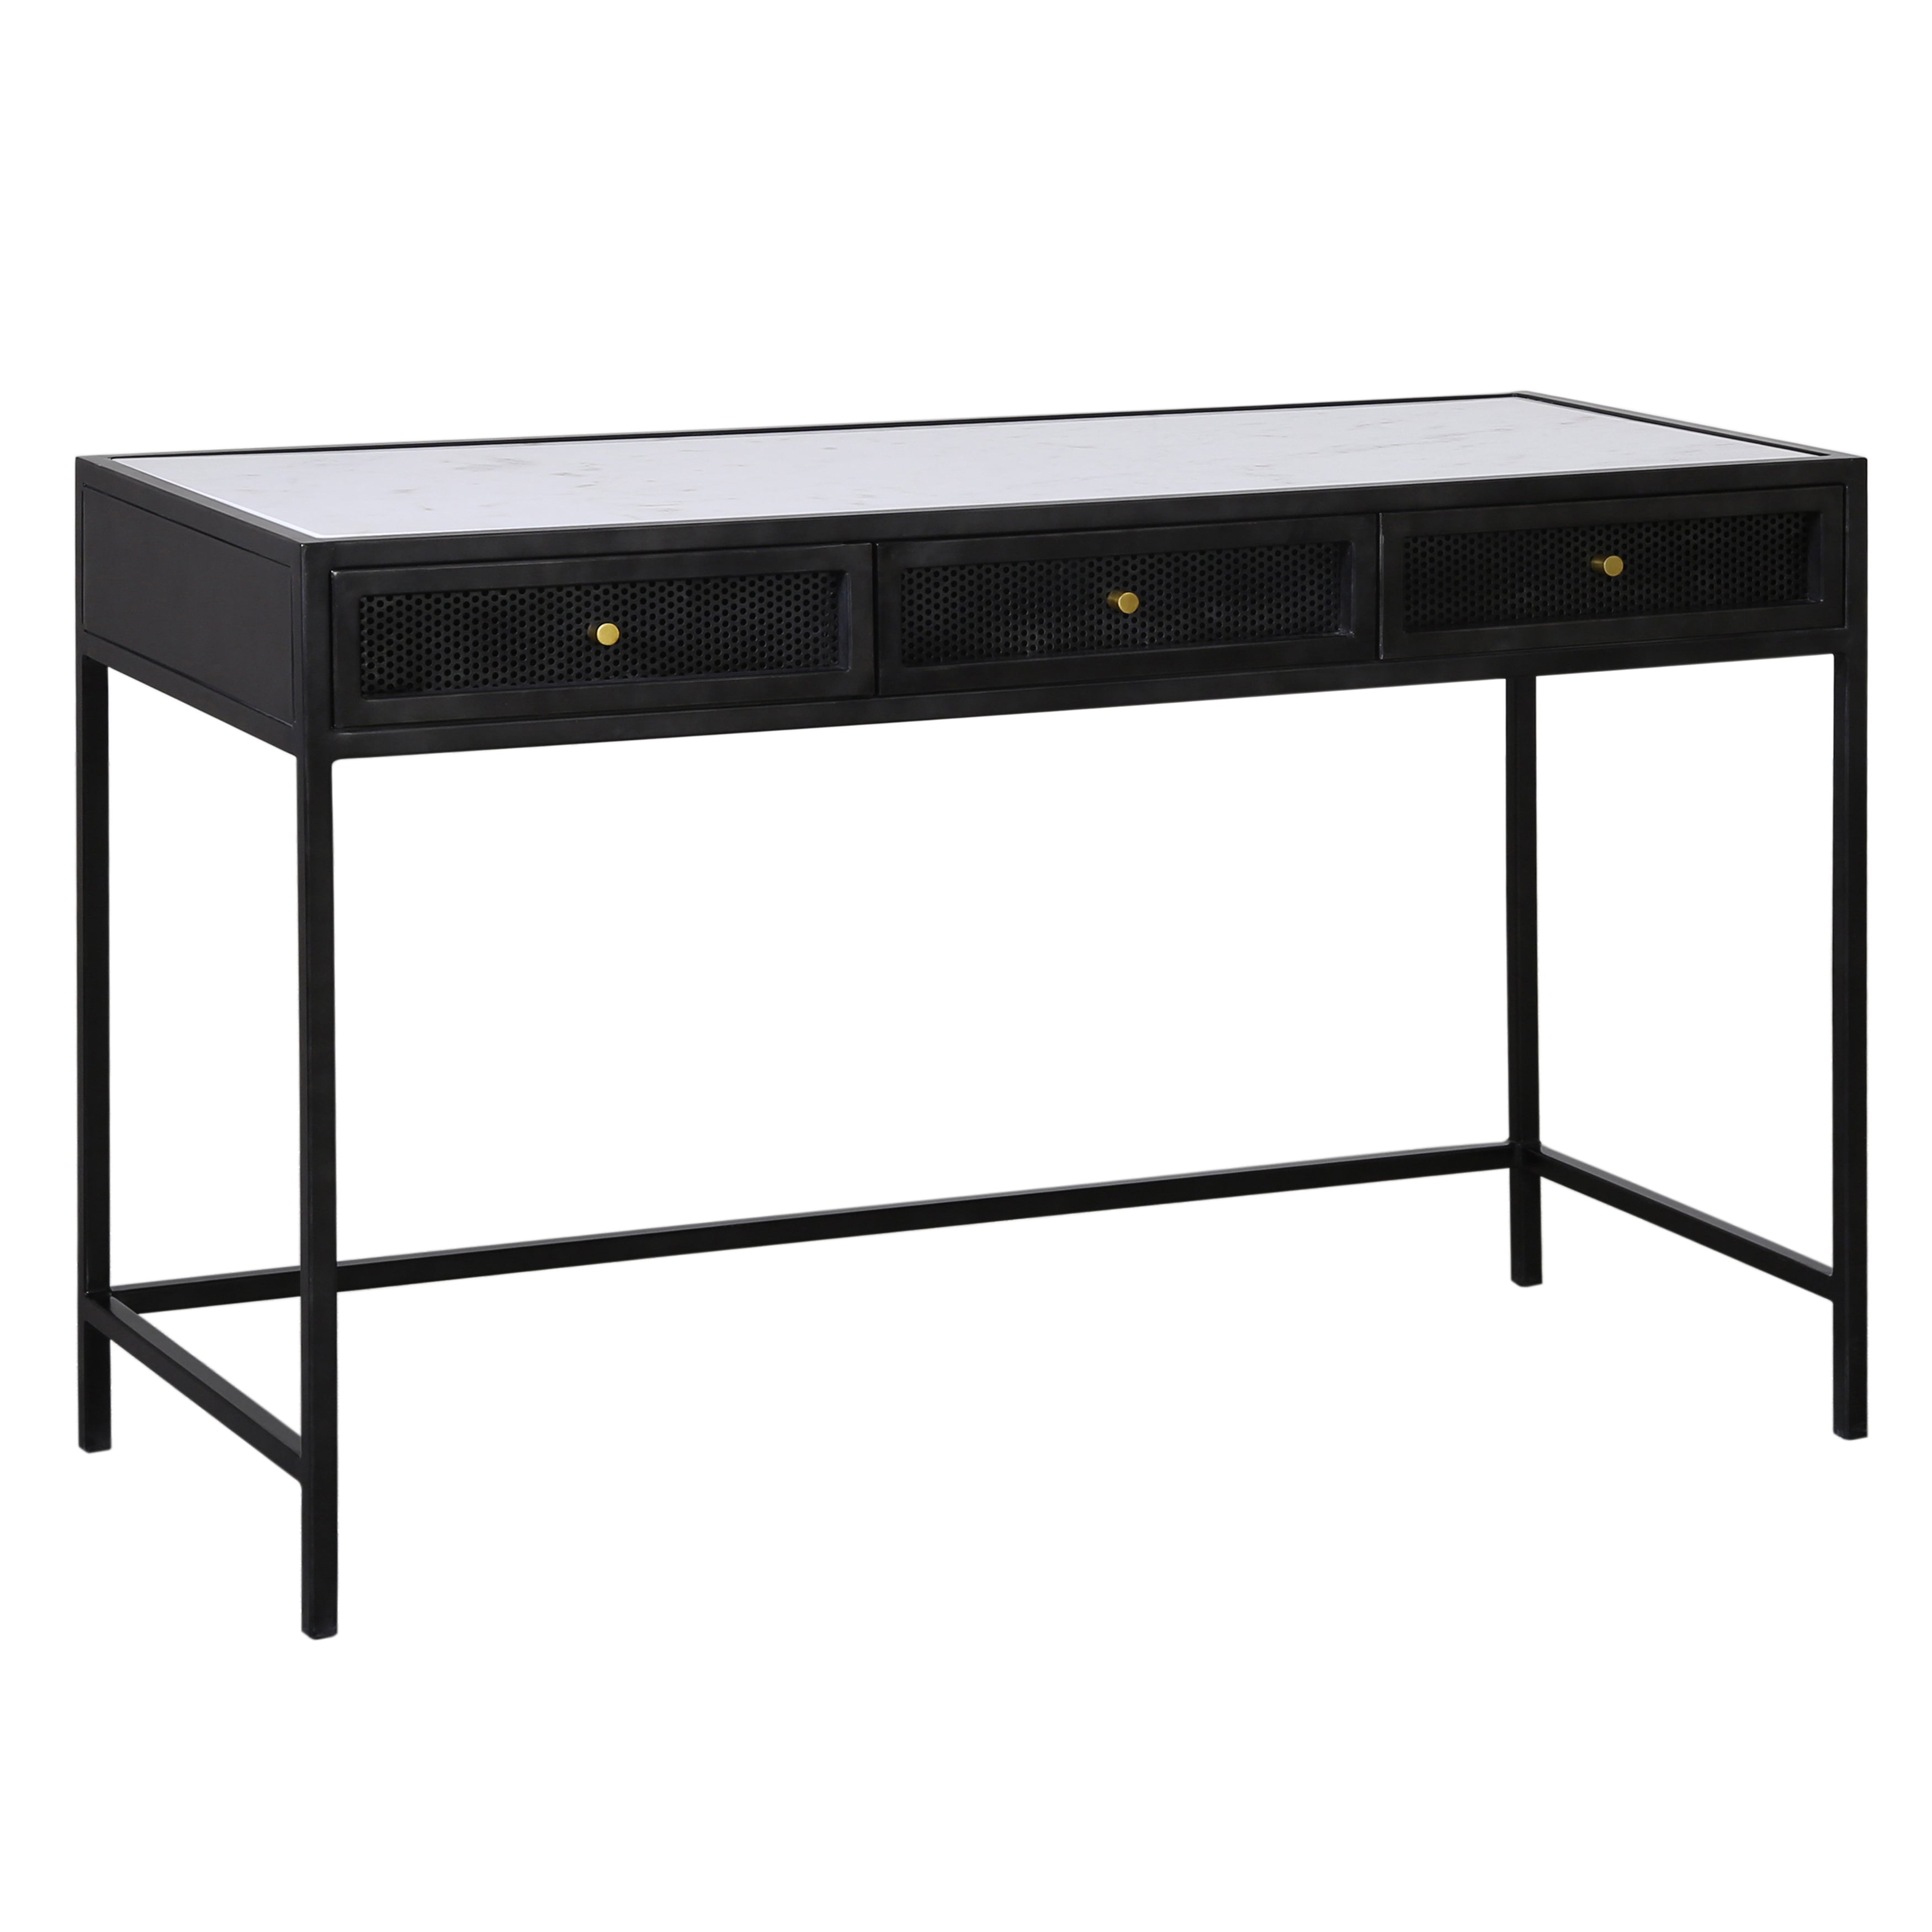 The Alaina Desk exemplifies modern elegance with a graceful silhouette and stunning contrasting materials. Meticulously crafted with high-quality iron, finished using a black antique colorway and banswara natural white marble top. It is completed with three mesh iron drawer fronts accented with gold hardware knobs for easy opening. Amethyst Home provides interior design, new home construction design consulting, vintage area rugs, and lighting in the Winter Garden metro area.